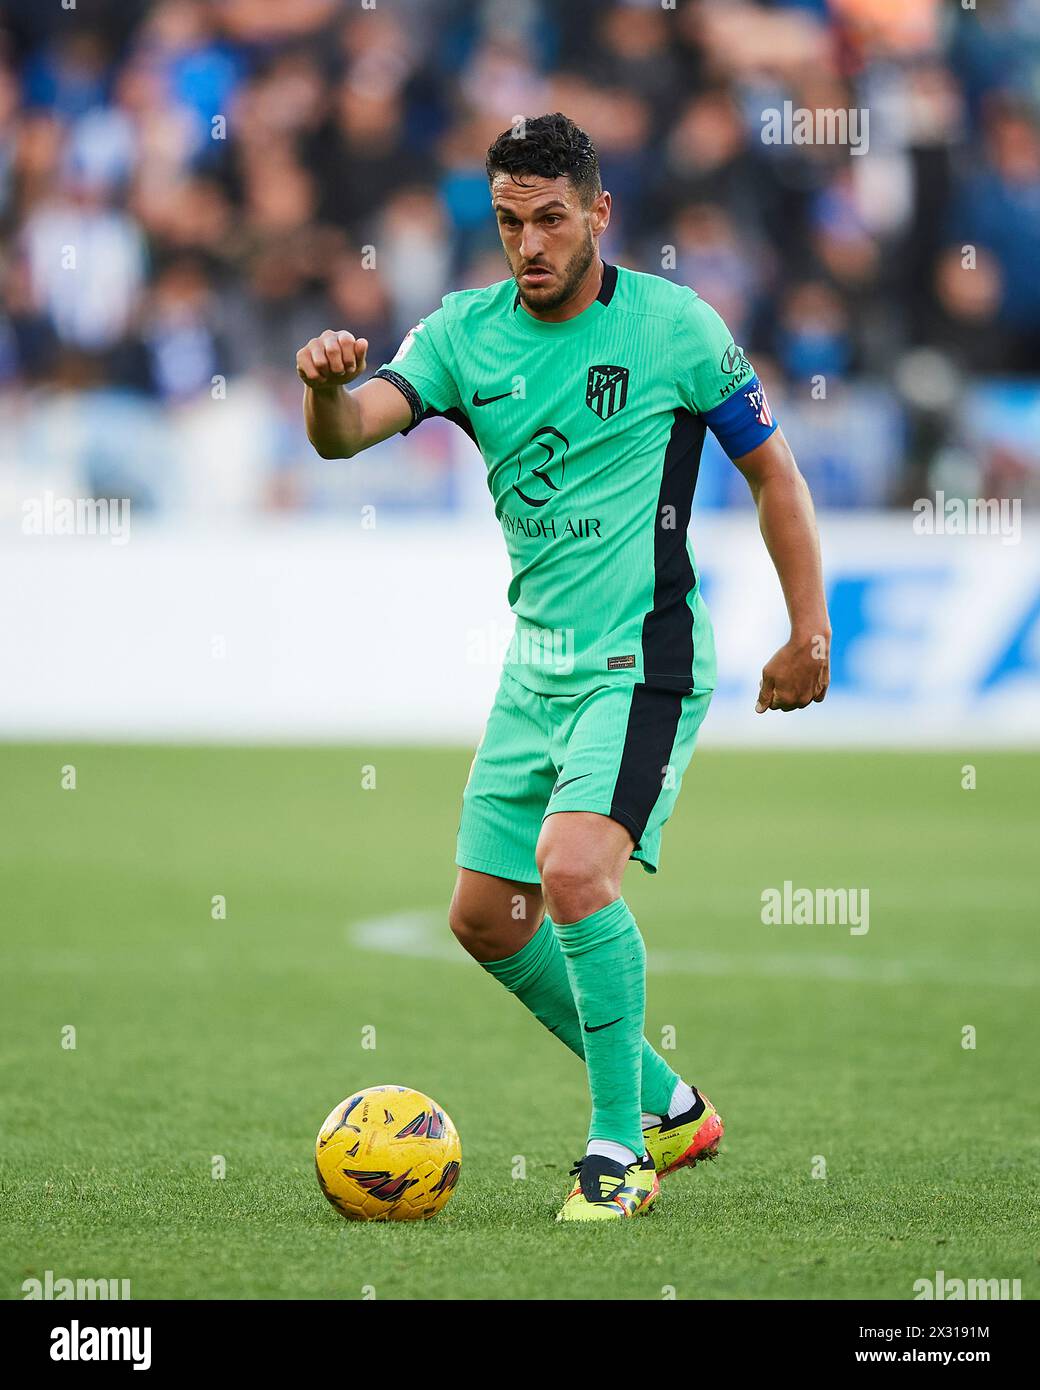 Koke Resurreccion of Atletico de Madrid with the ball during the LaLiga EA Sports match between Deportivo Alaves and Atletico de Madrid at Mendizorrot Stock Photo